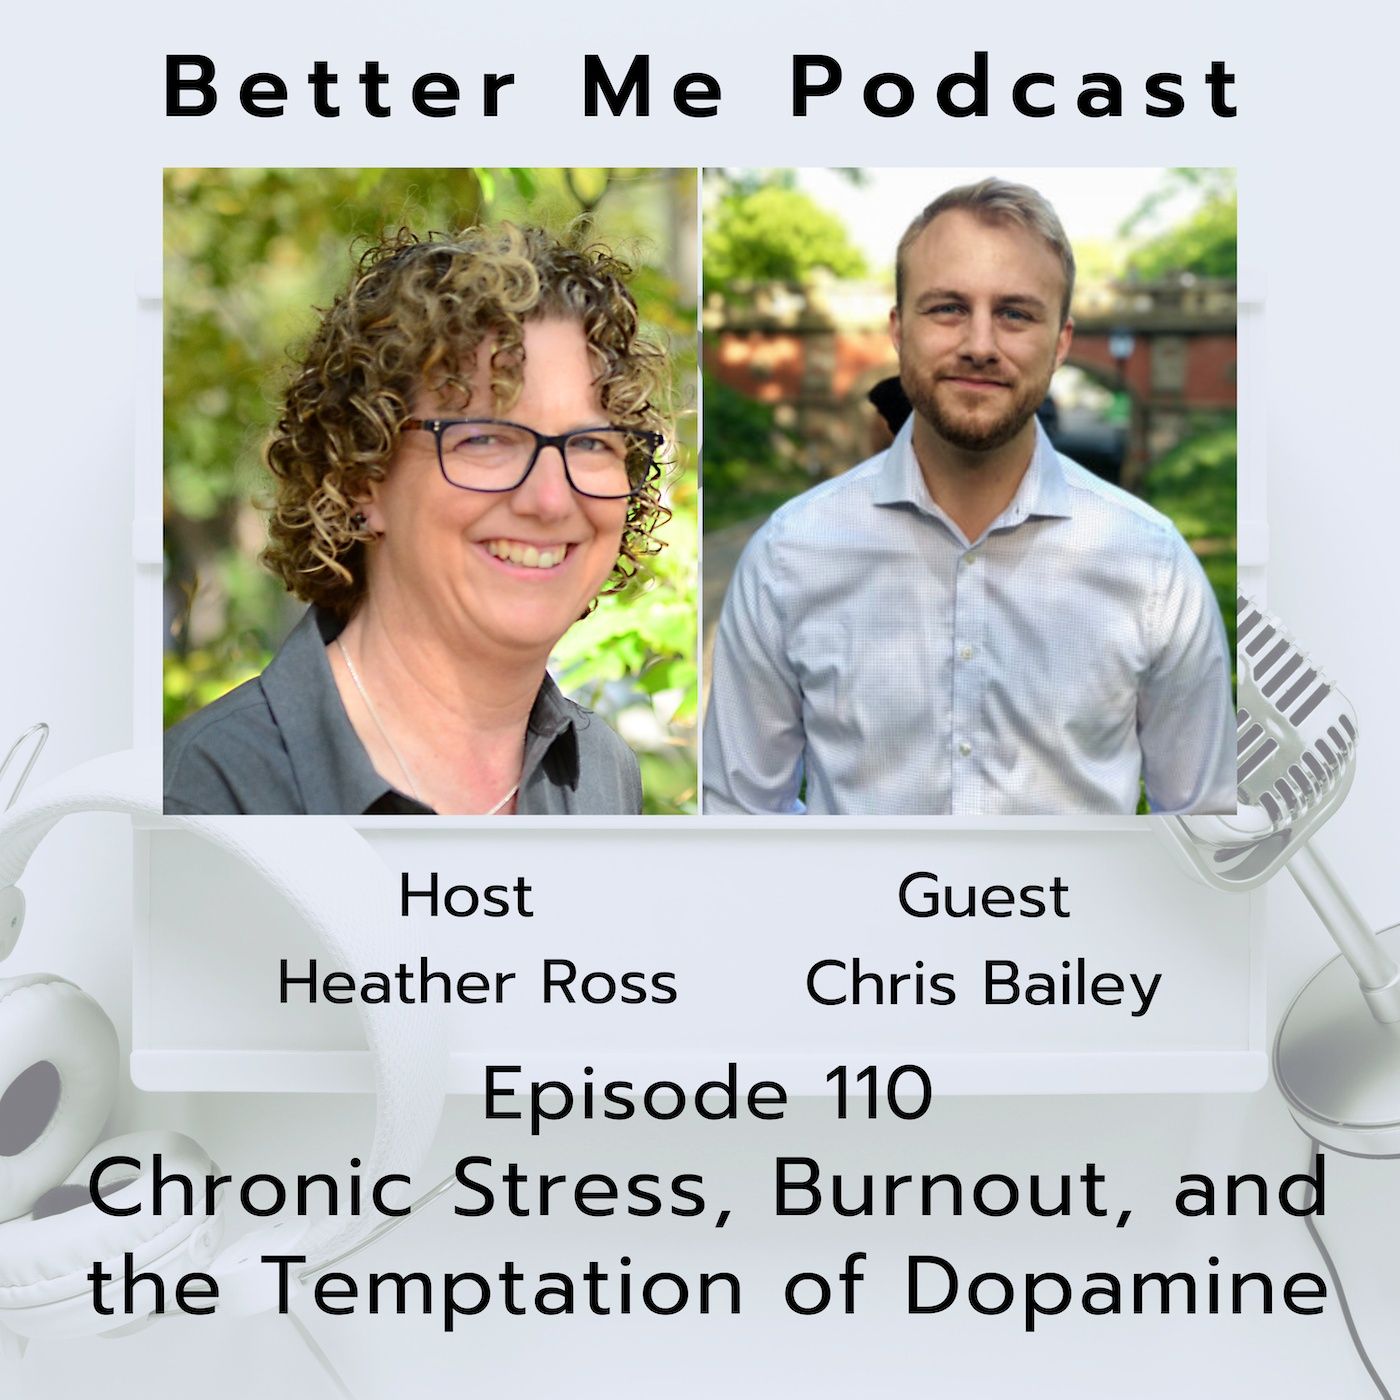 EP 110 Chronic Stress, Burnout, and the Temptation of Dopamine (with guest Chris Bailey)